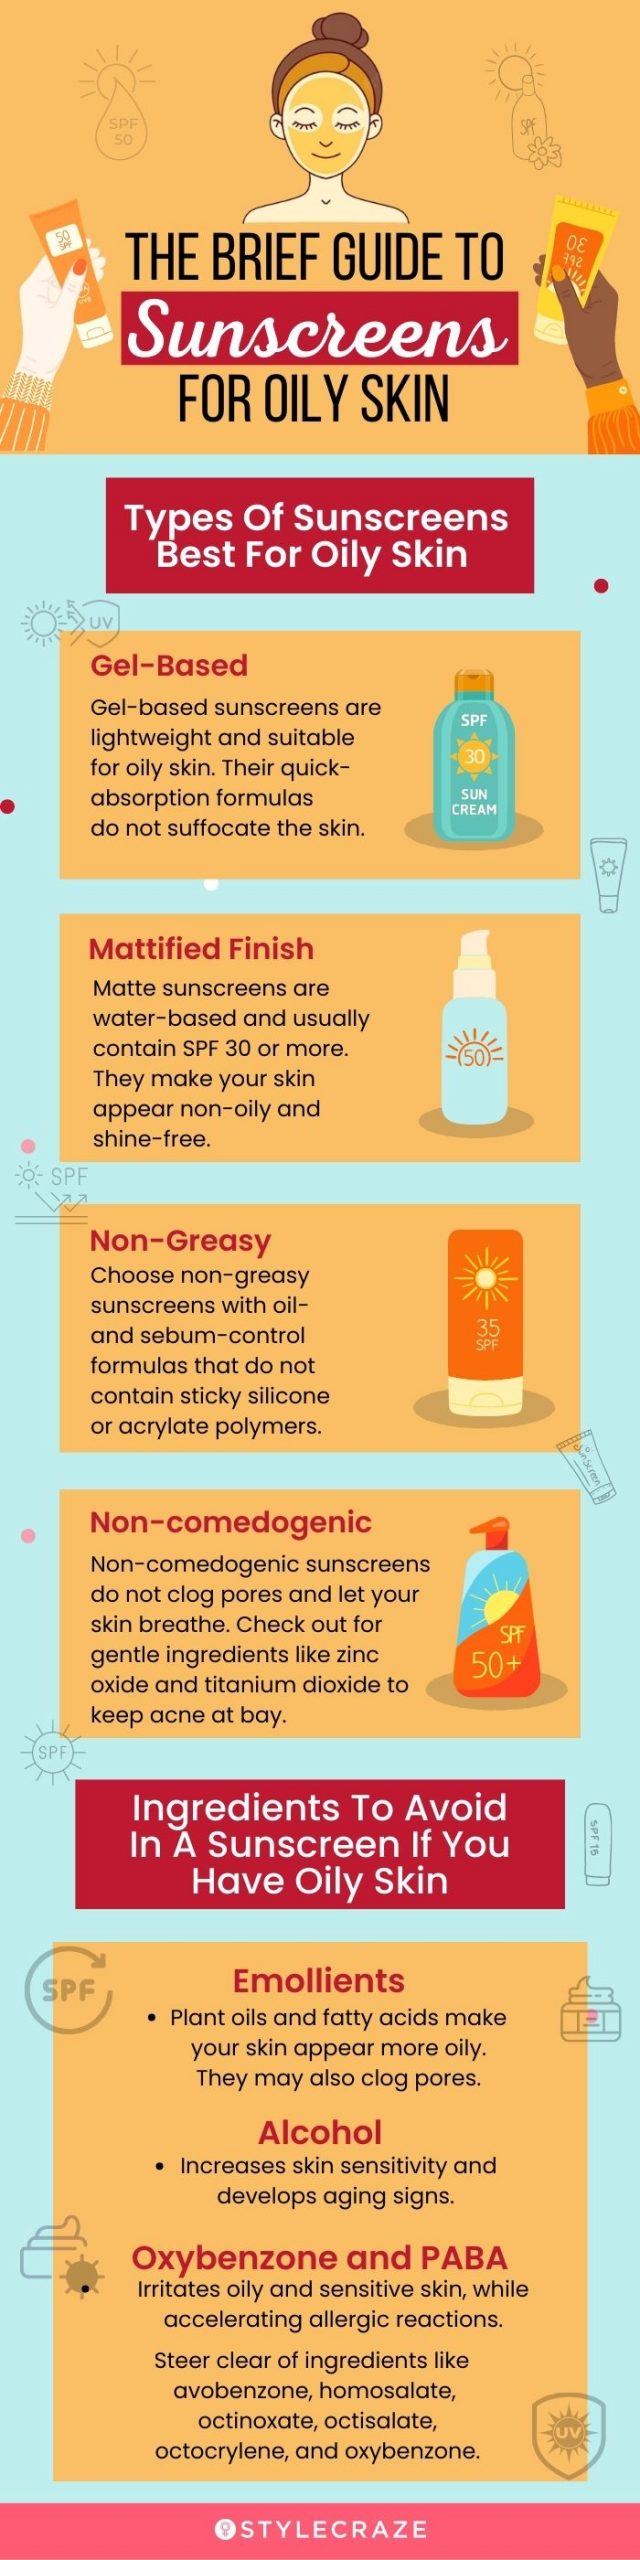 The Brief Guide To Sunscreen For Oily Skin(infographic)